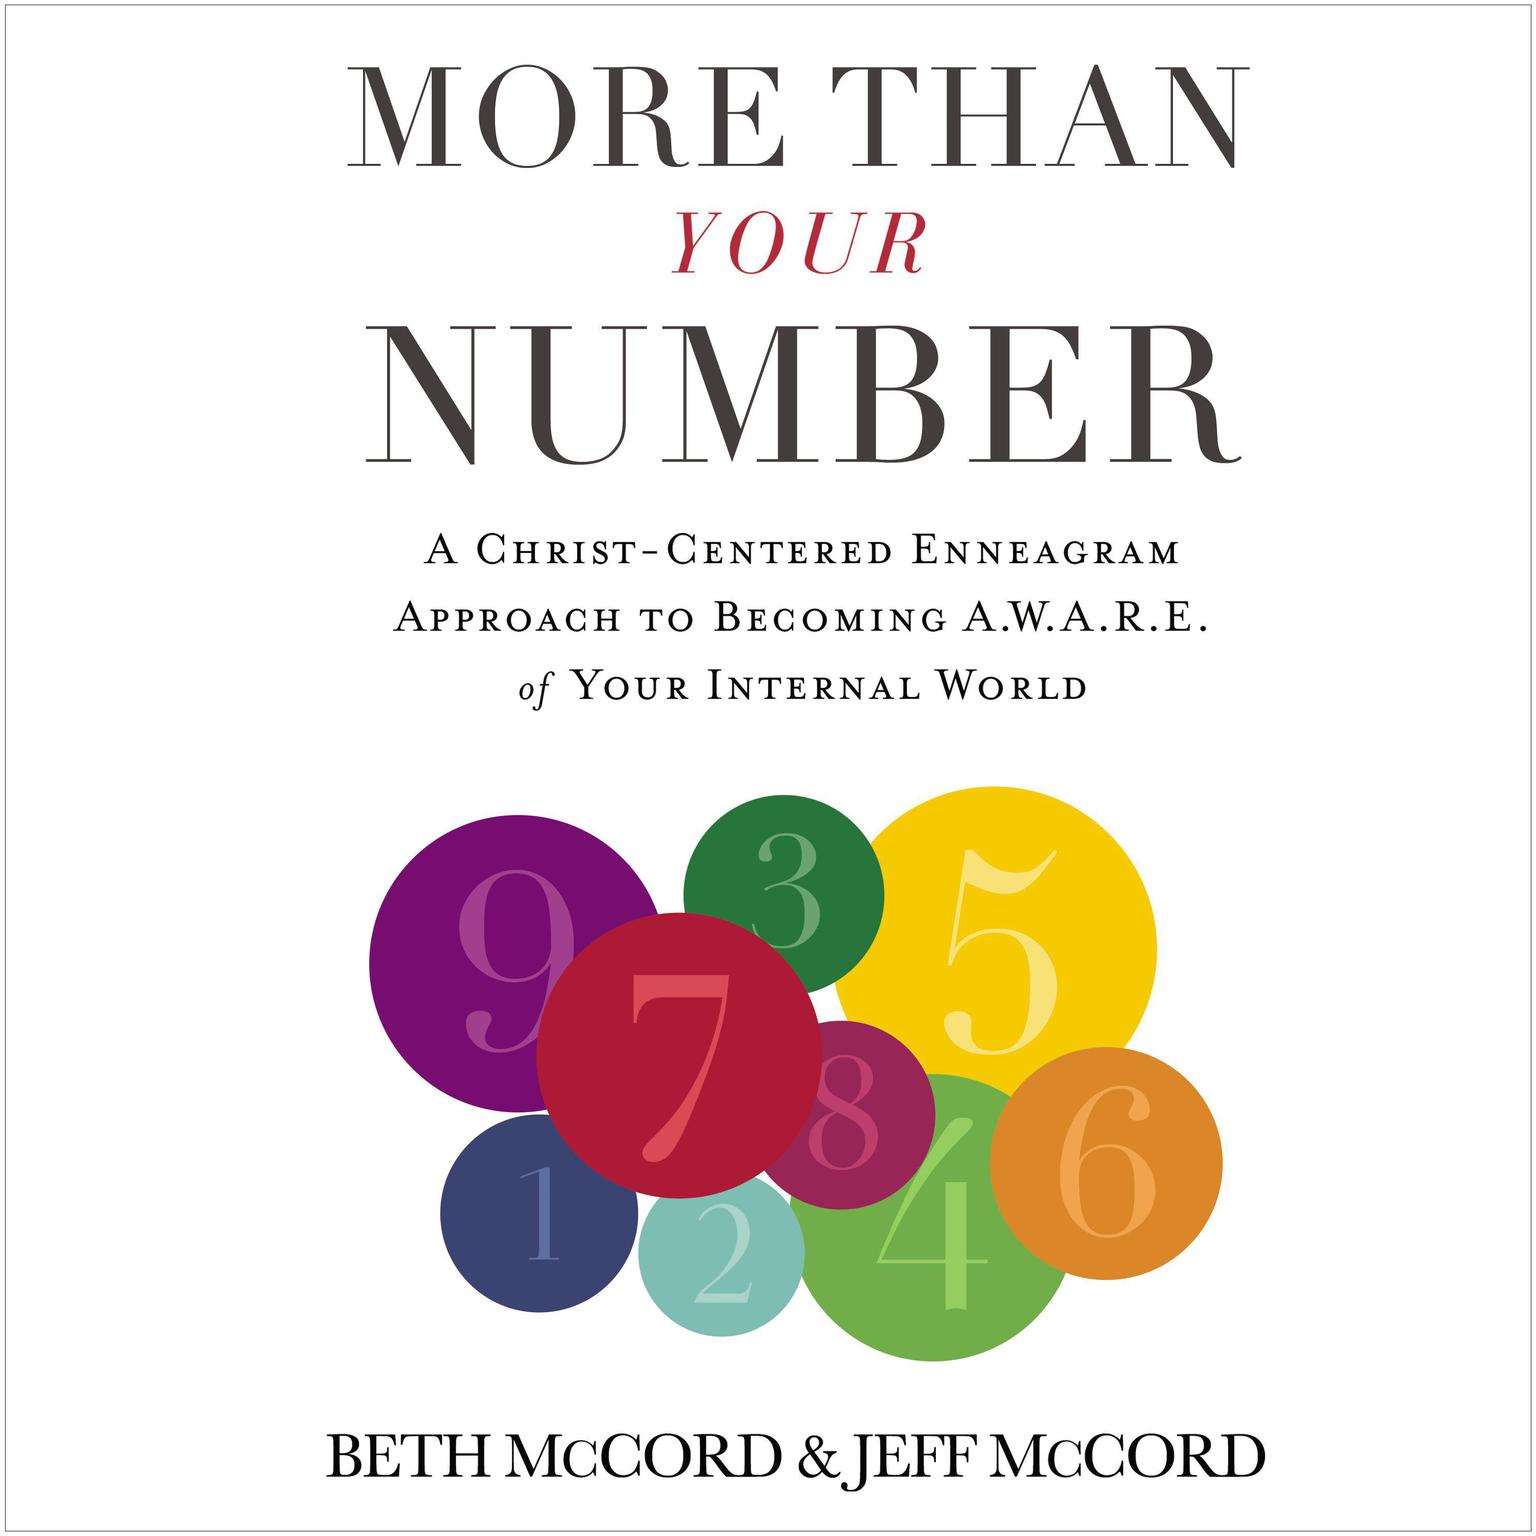 More Than Your Number: A Christ-Centered Enneagram Approach to Becoming AWARE of Your Internal World Audiobook, by Beth McCord